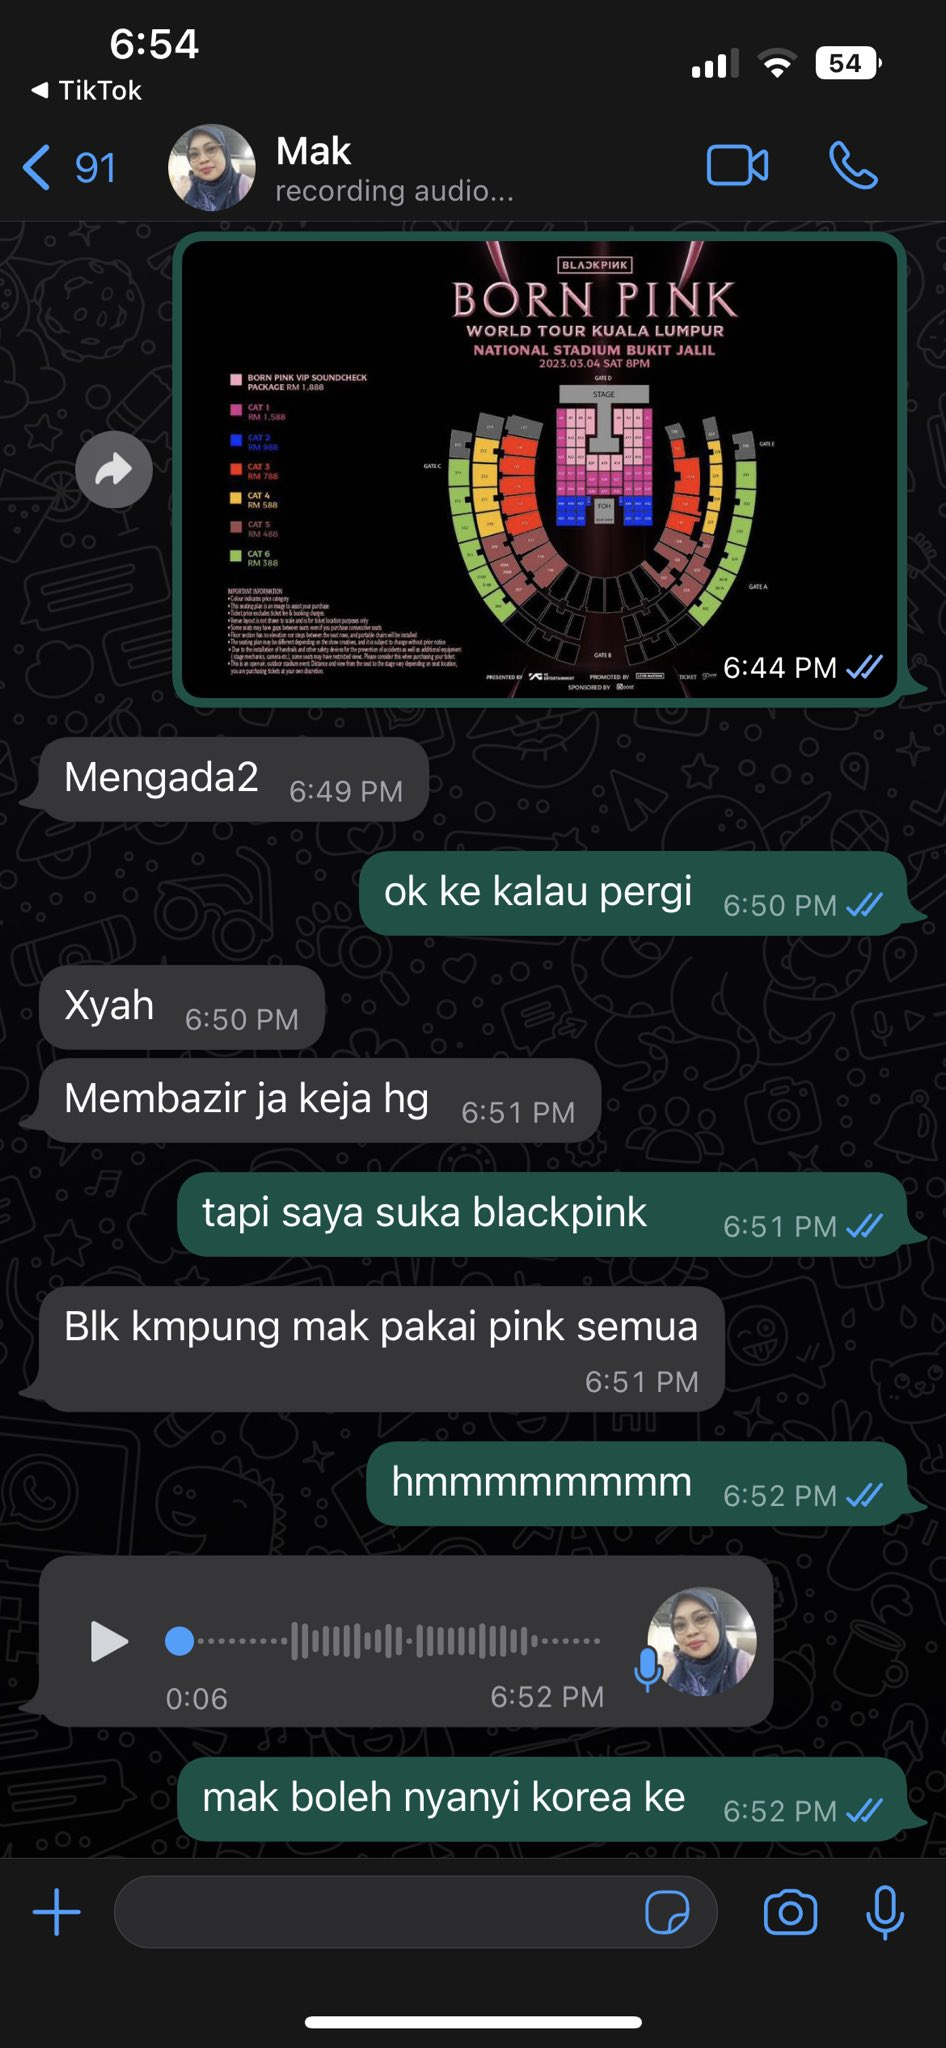 M'sian teen tries to borrow money from mum for blackpink concert, fails hilariously